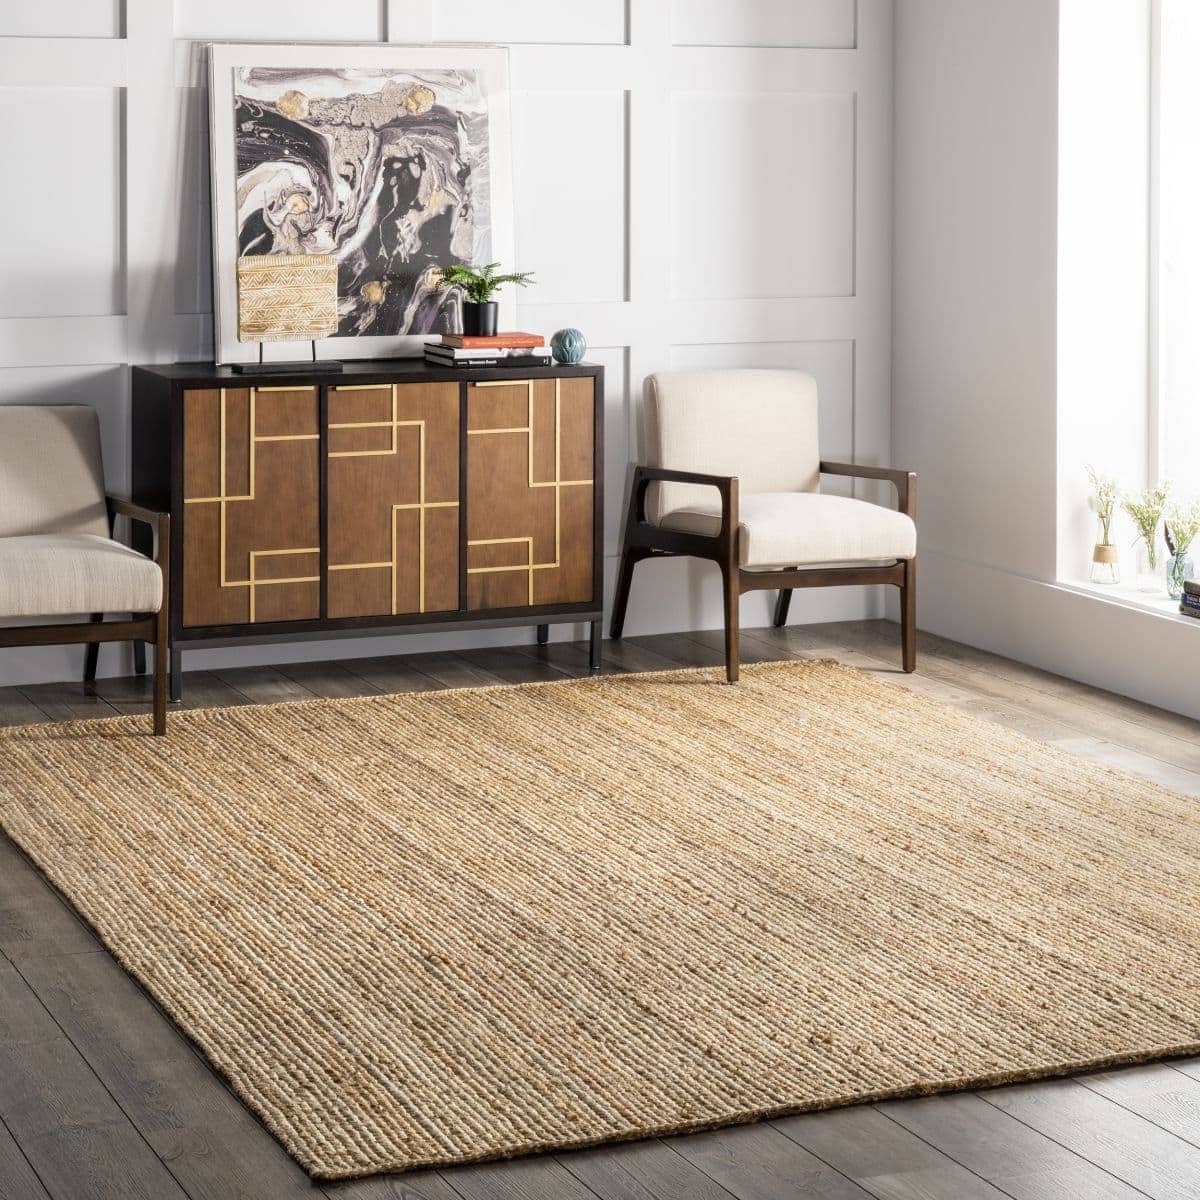 10 Best Rugs For High Traffic Areas, Best Rugs For Family Room